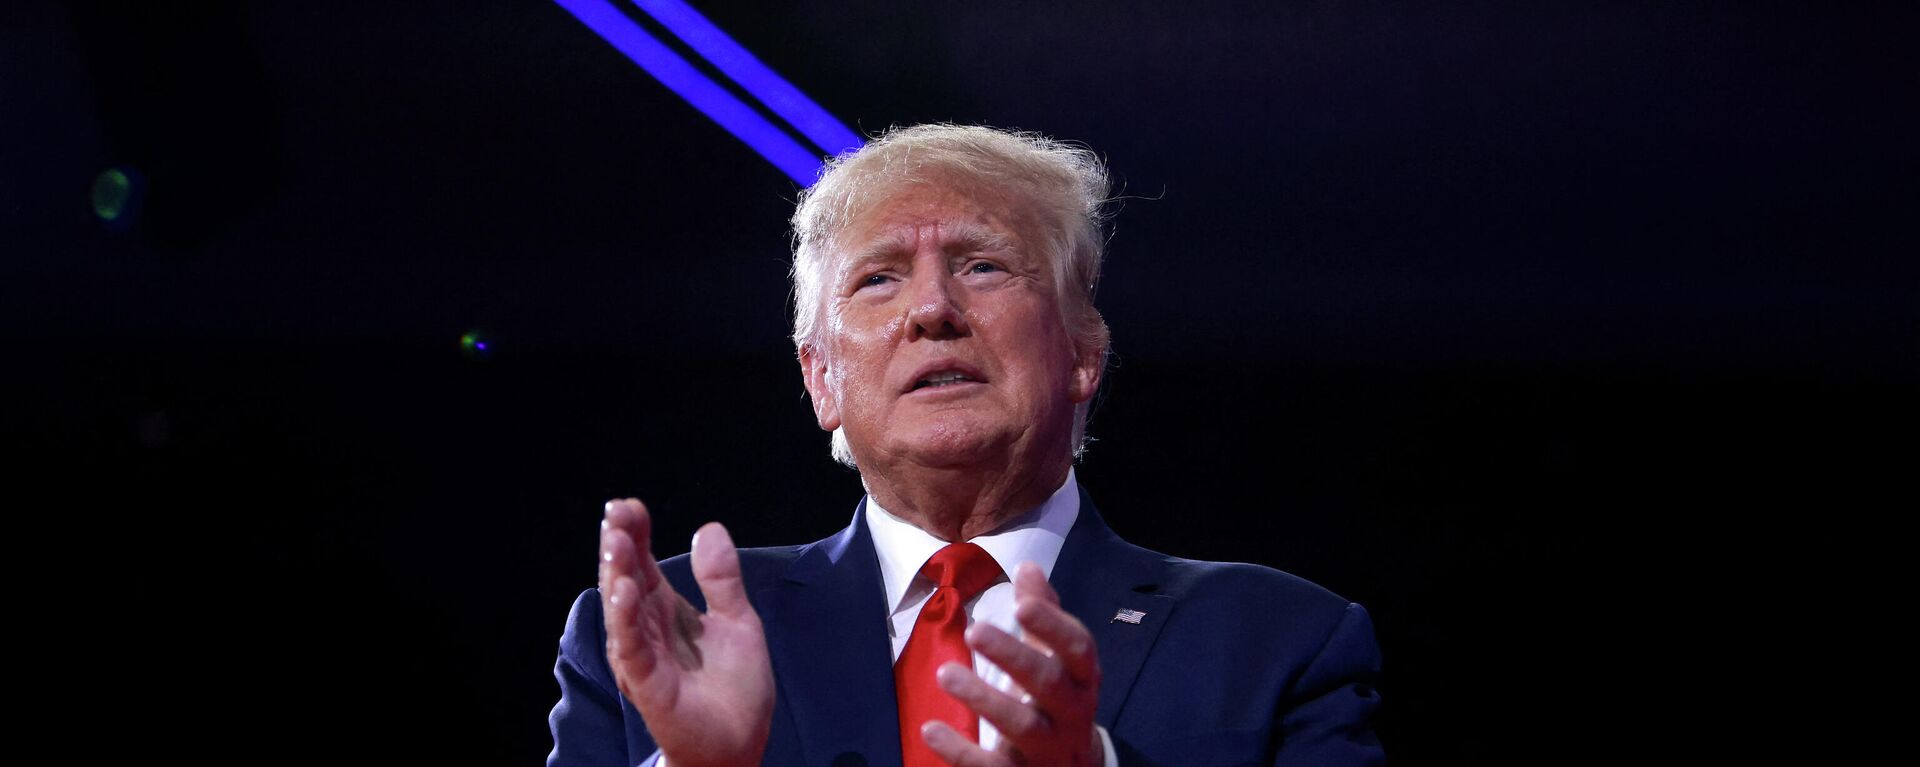 Former U.S. President Donald Trump speaks during the Conservative Political Action Conference (CPAC) at The Rosen Shingle Creek on February 26, 2022 in Orlando, Florida - Sputnik International, 1920, 03.04.2022